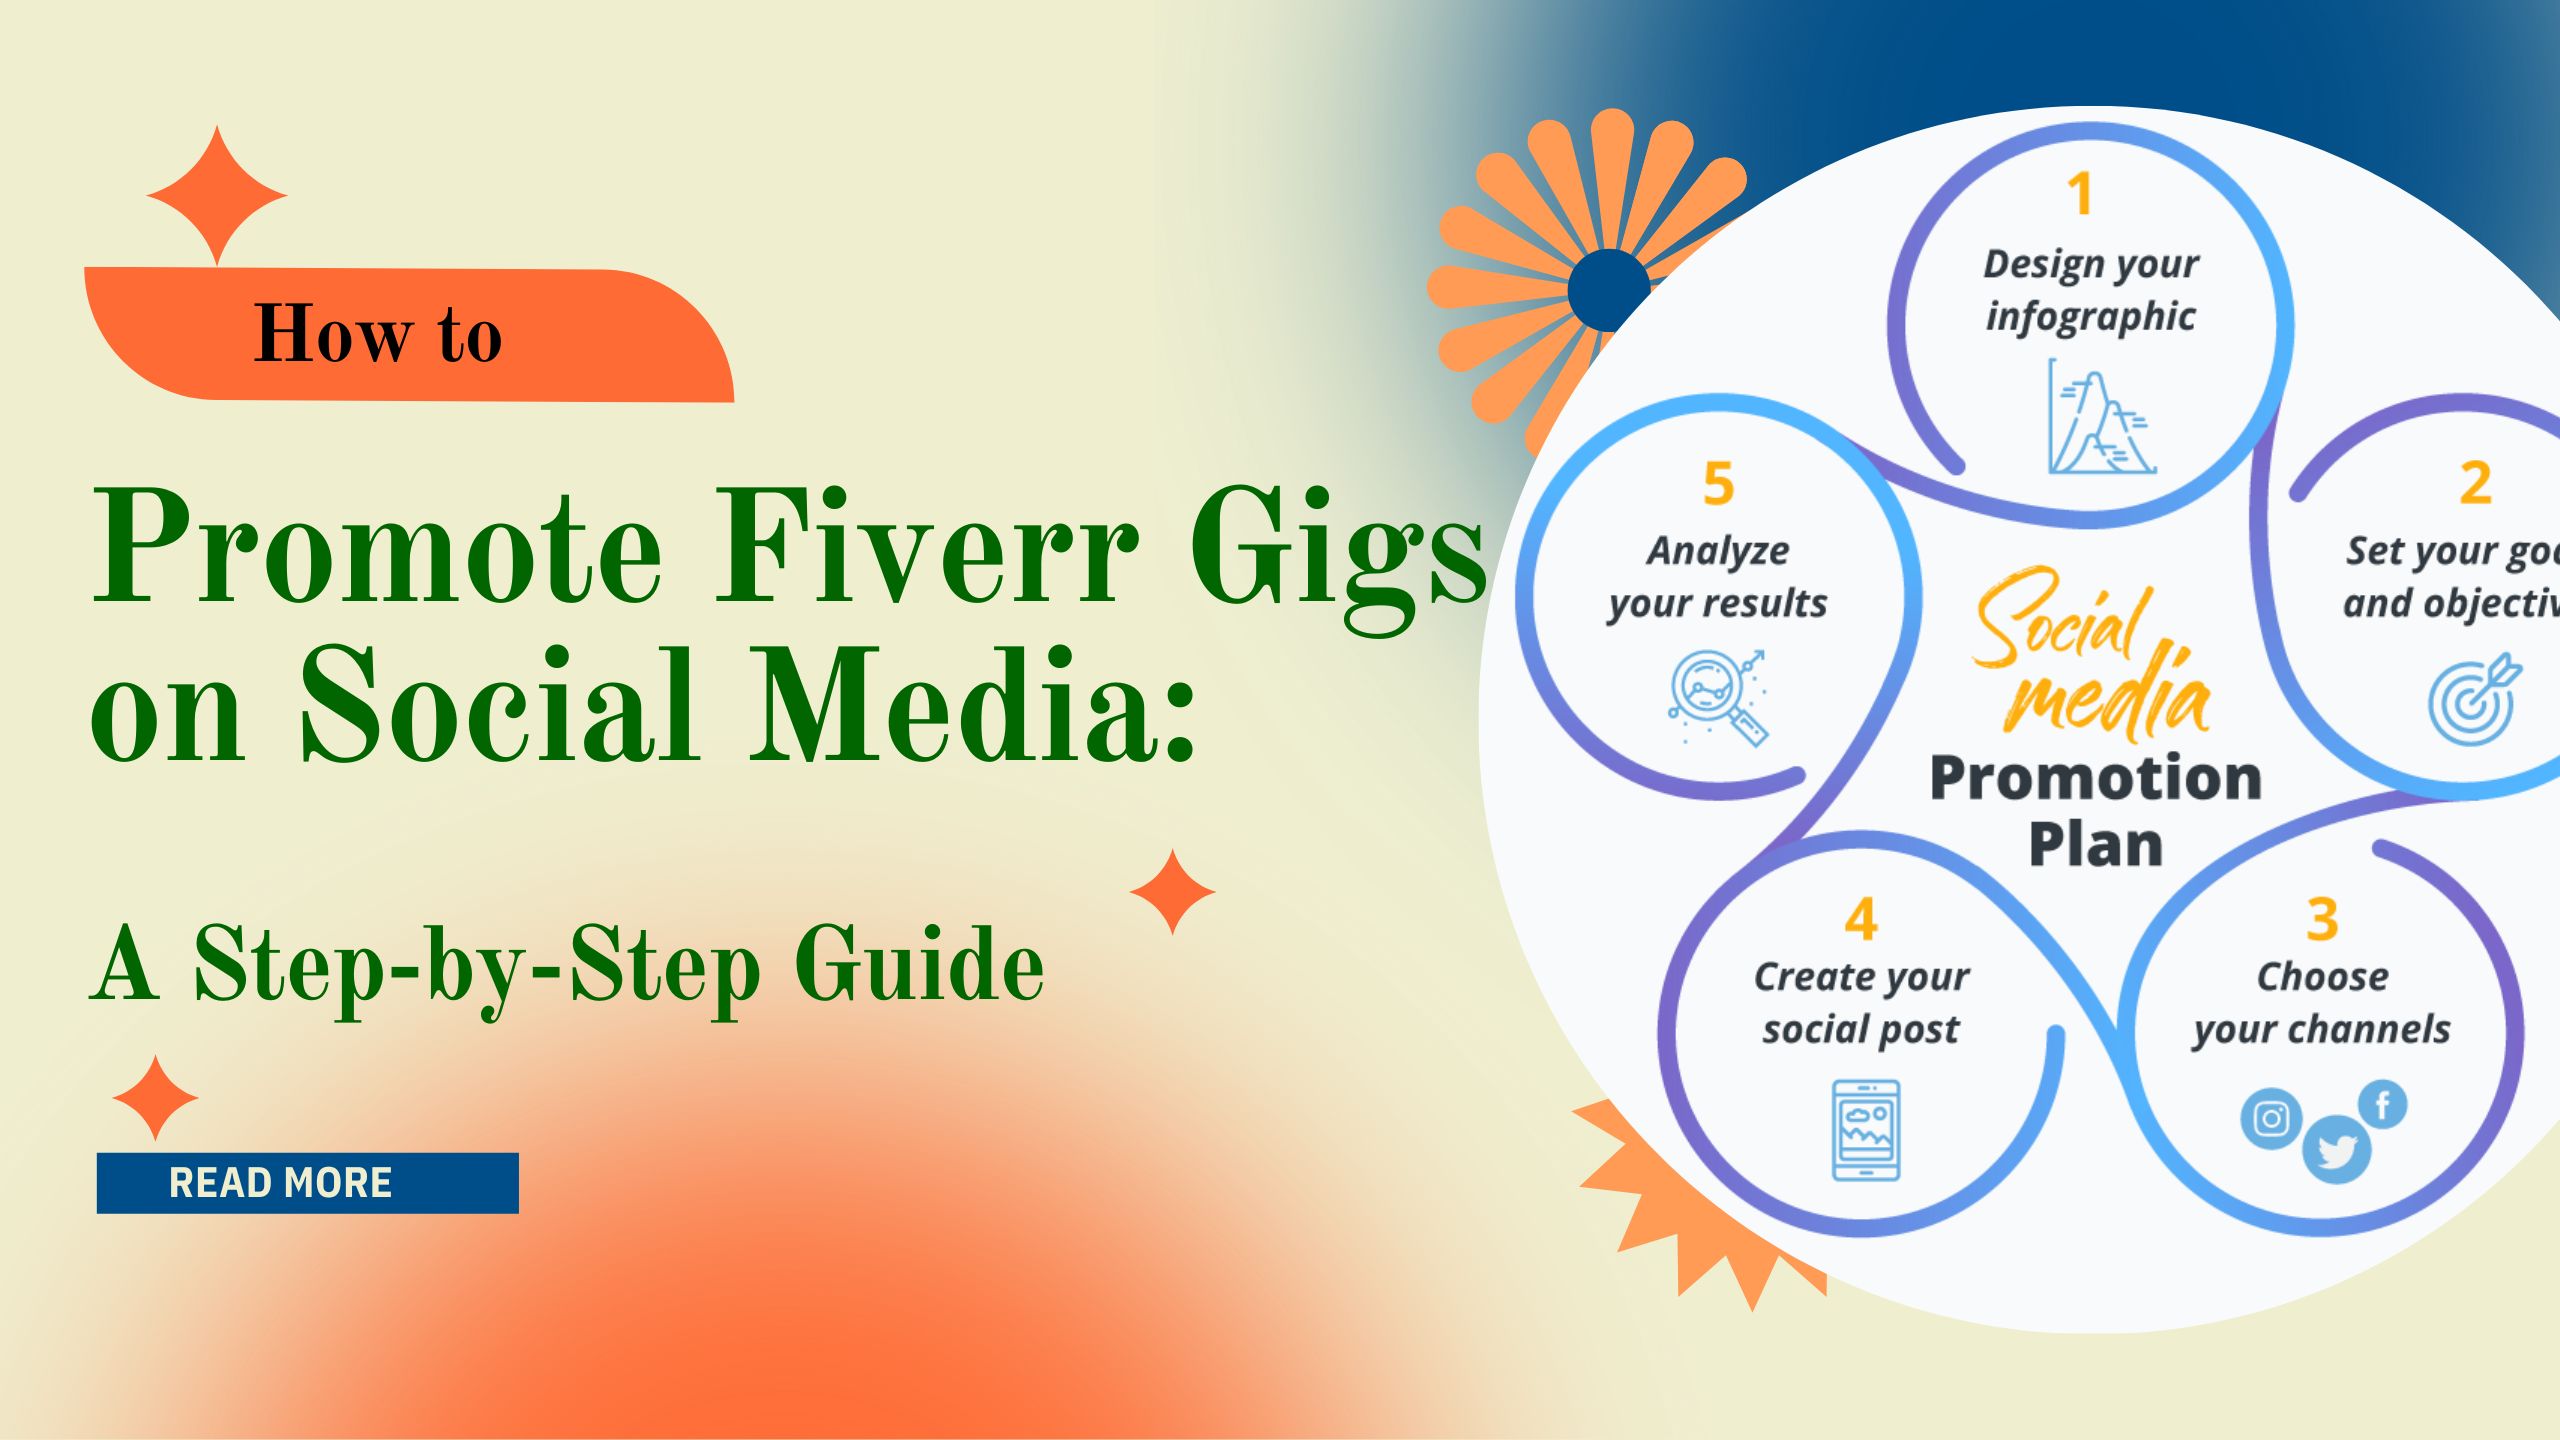 How to Promote Fiverr Gigs on Social Media: A Step-by-Step Guide